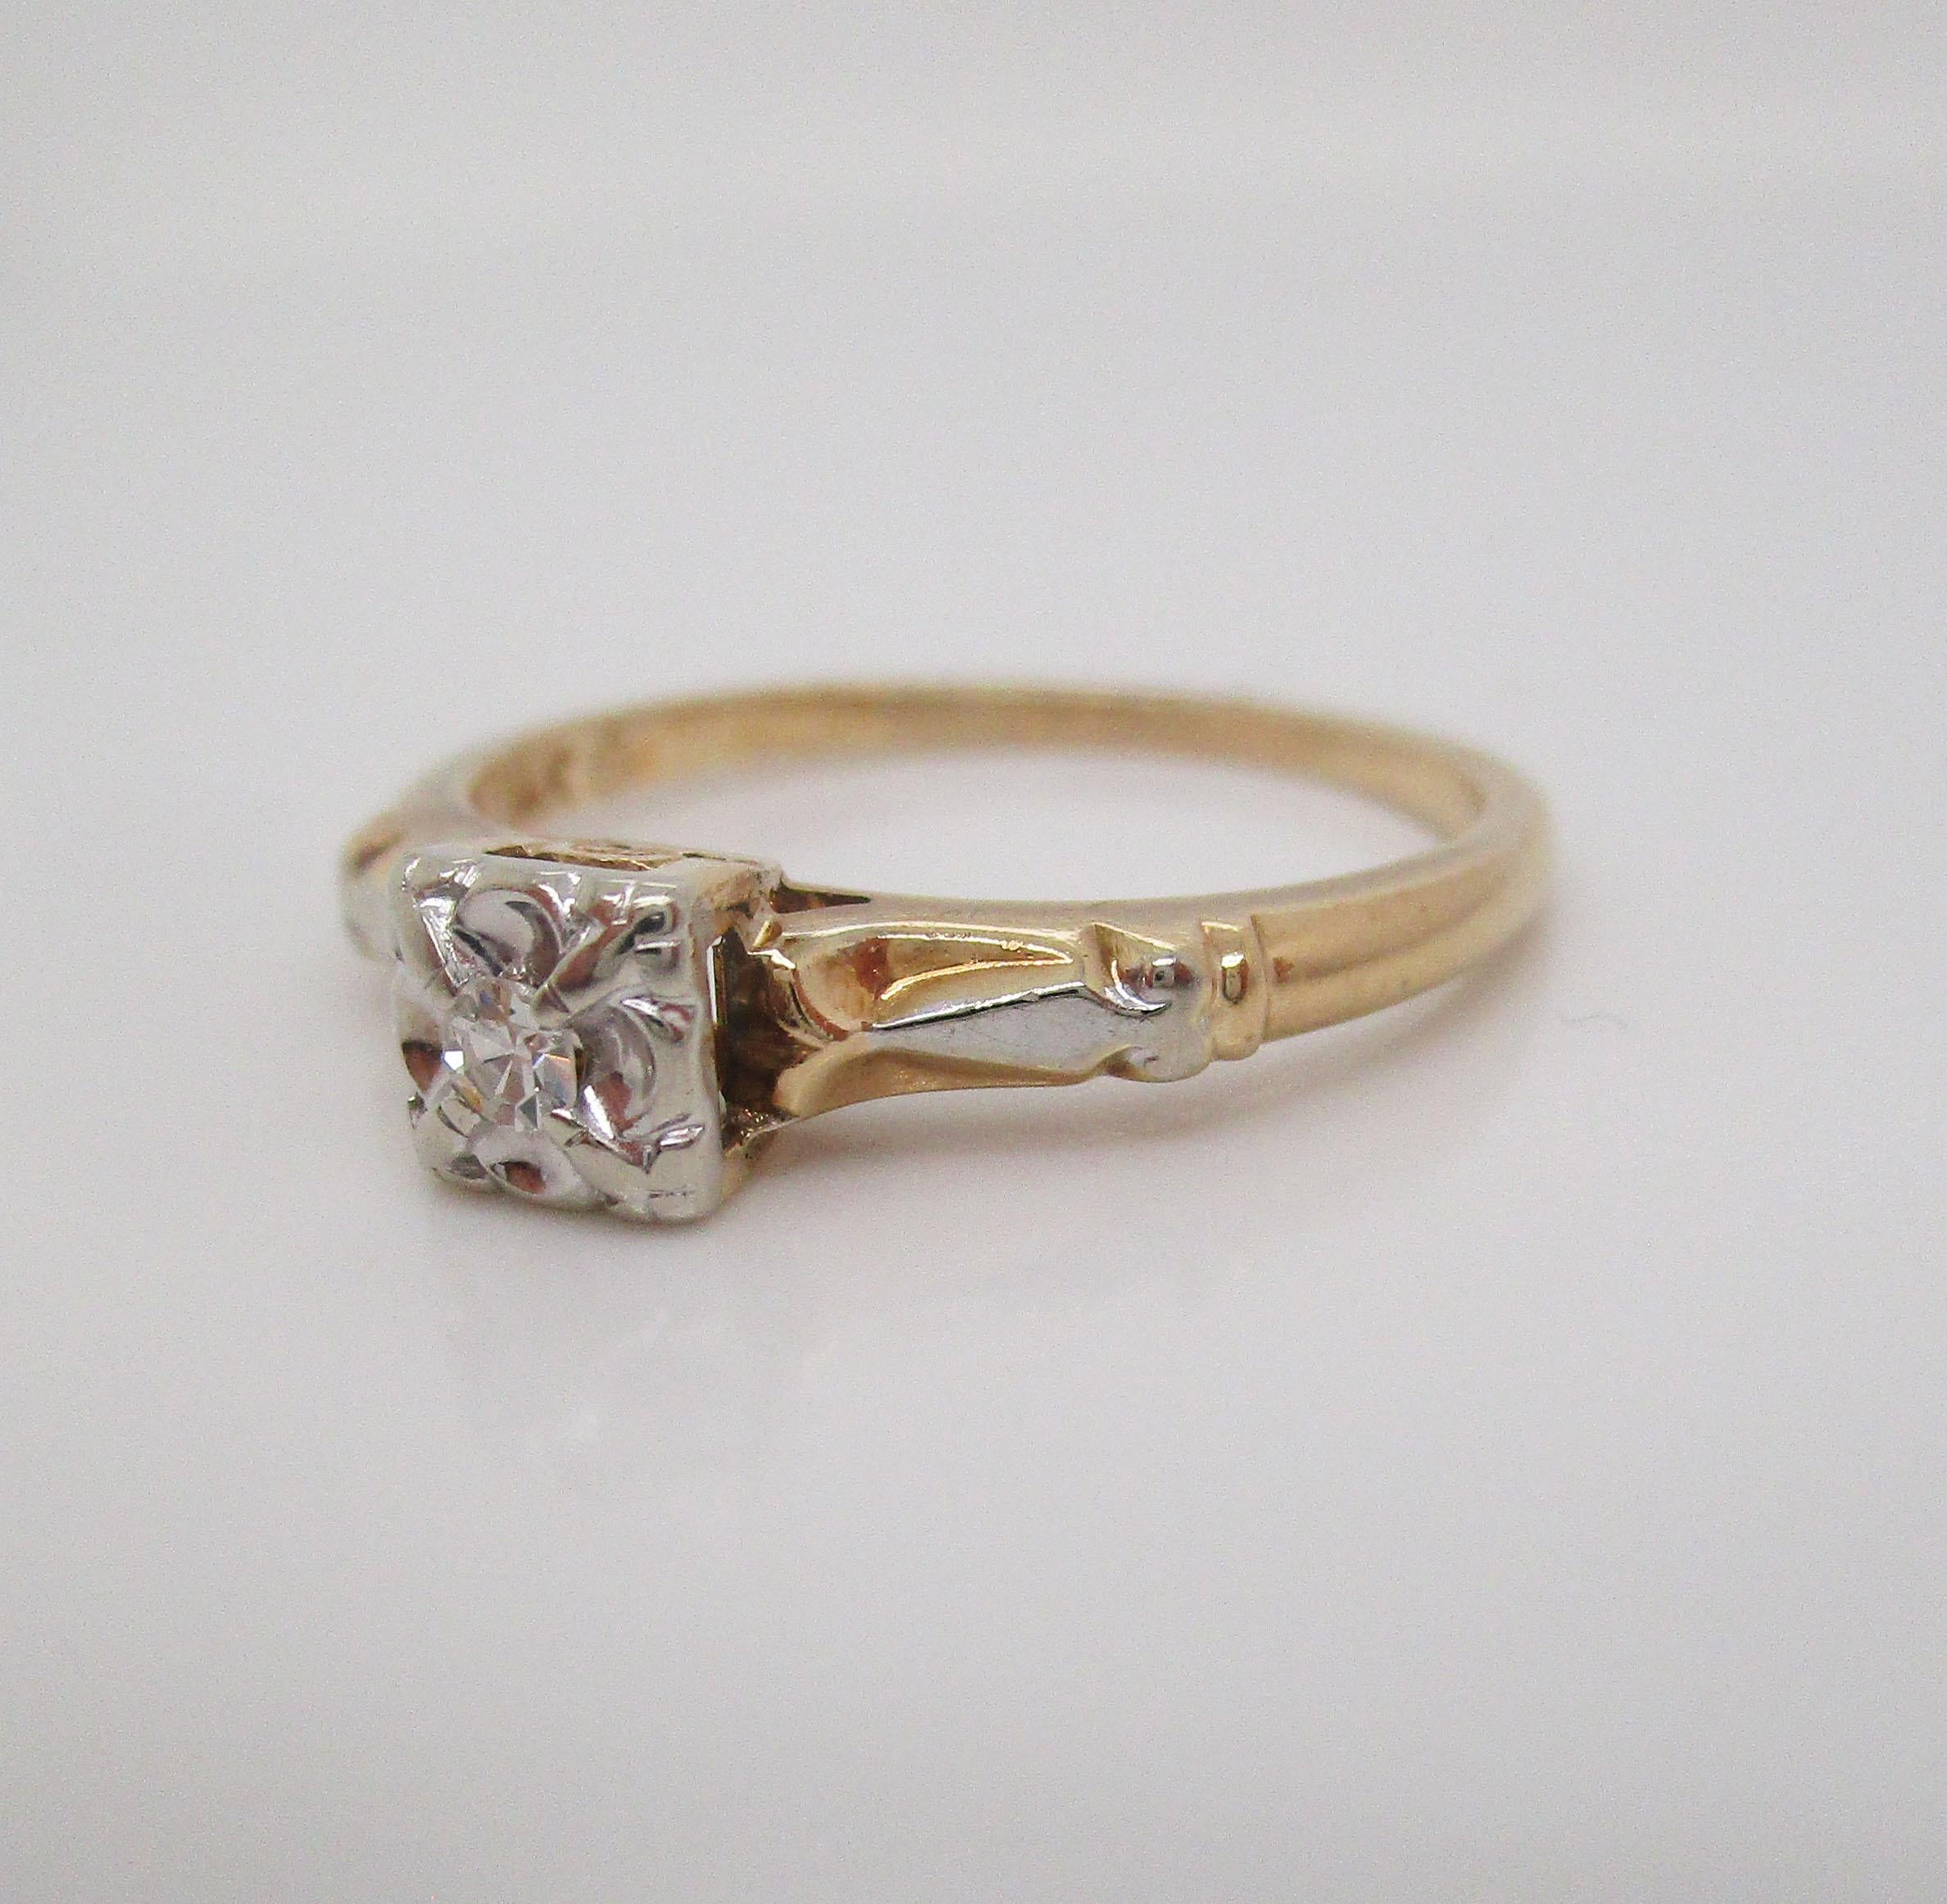 This is a beautiful mid-century engagement ring in 14k yellow and white gold with a brilliant white single cut diamond center stone! The ring has a classic mid-century look with a yellow gold shank and a bright white gold illusion head with an